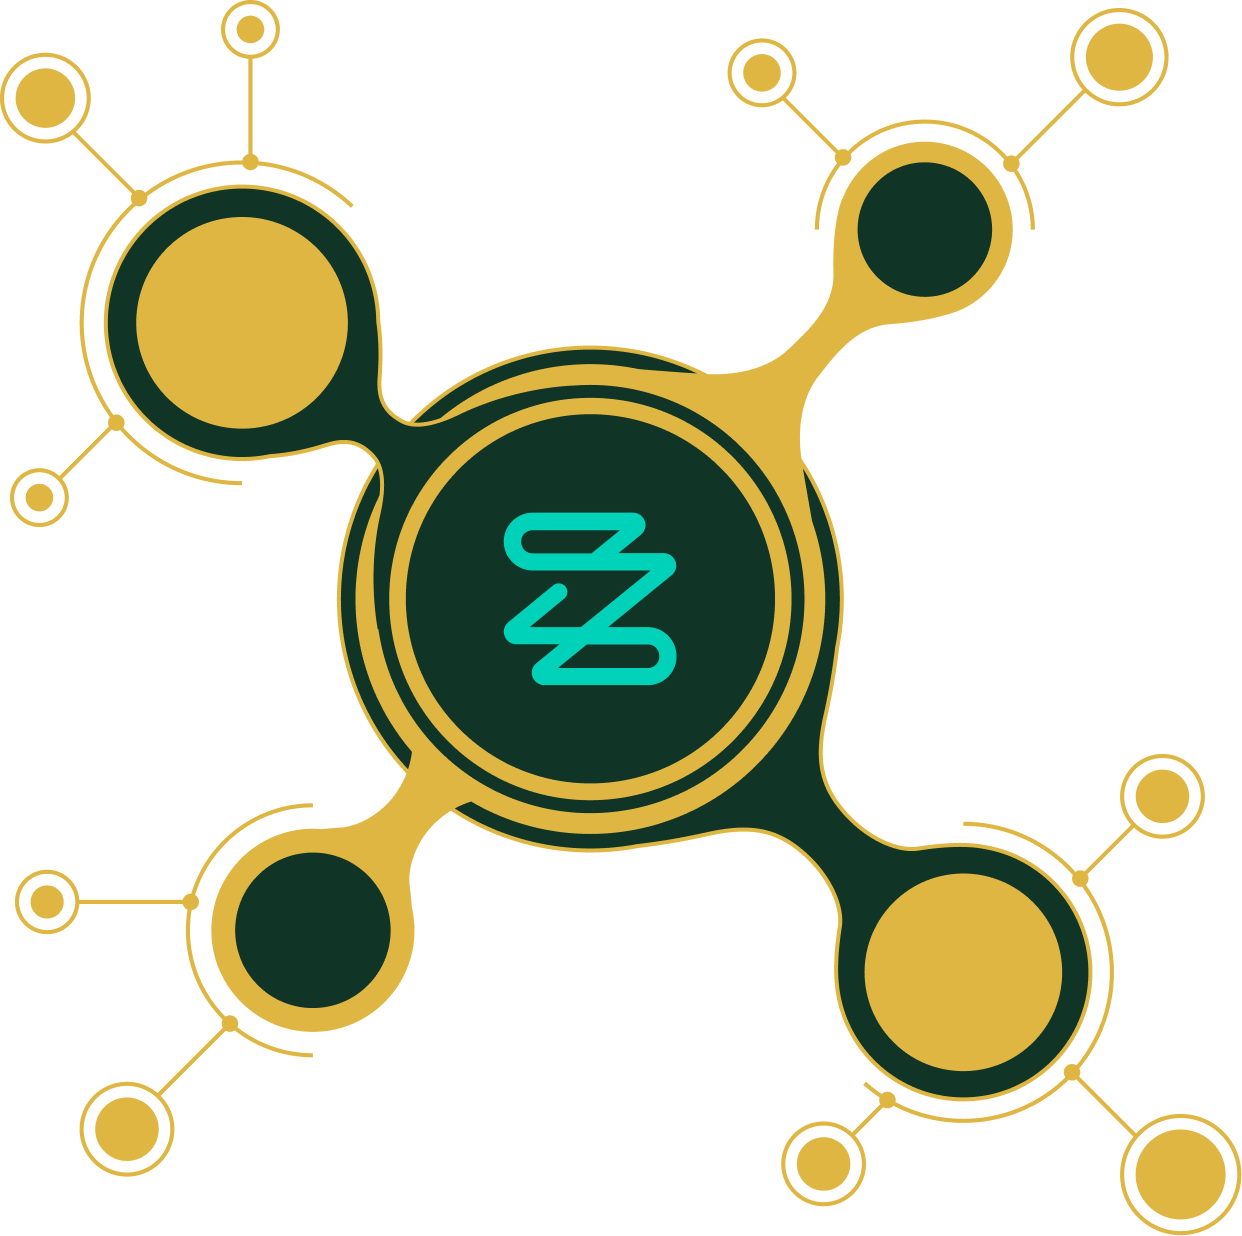 A green and yellow logo with the letter z.